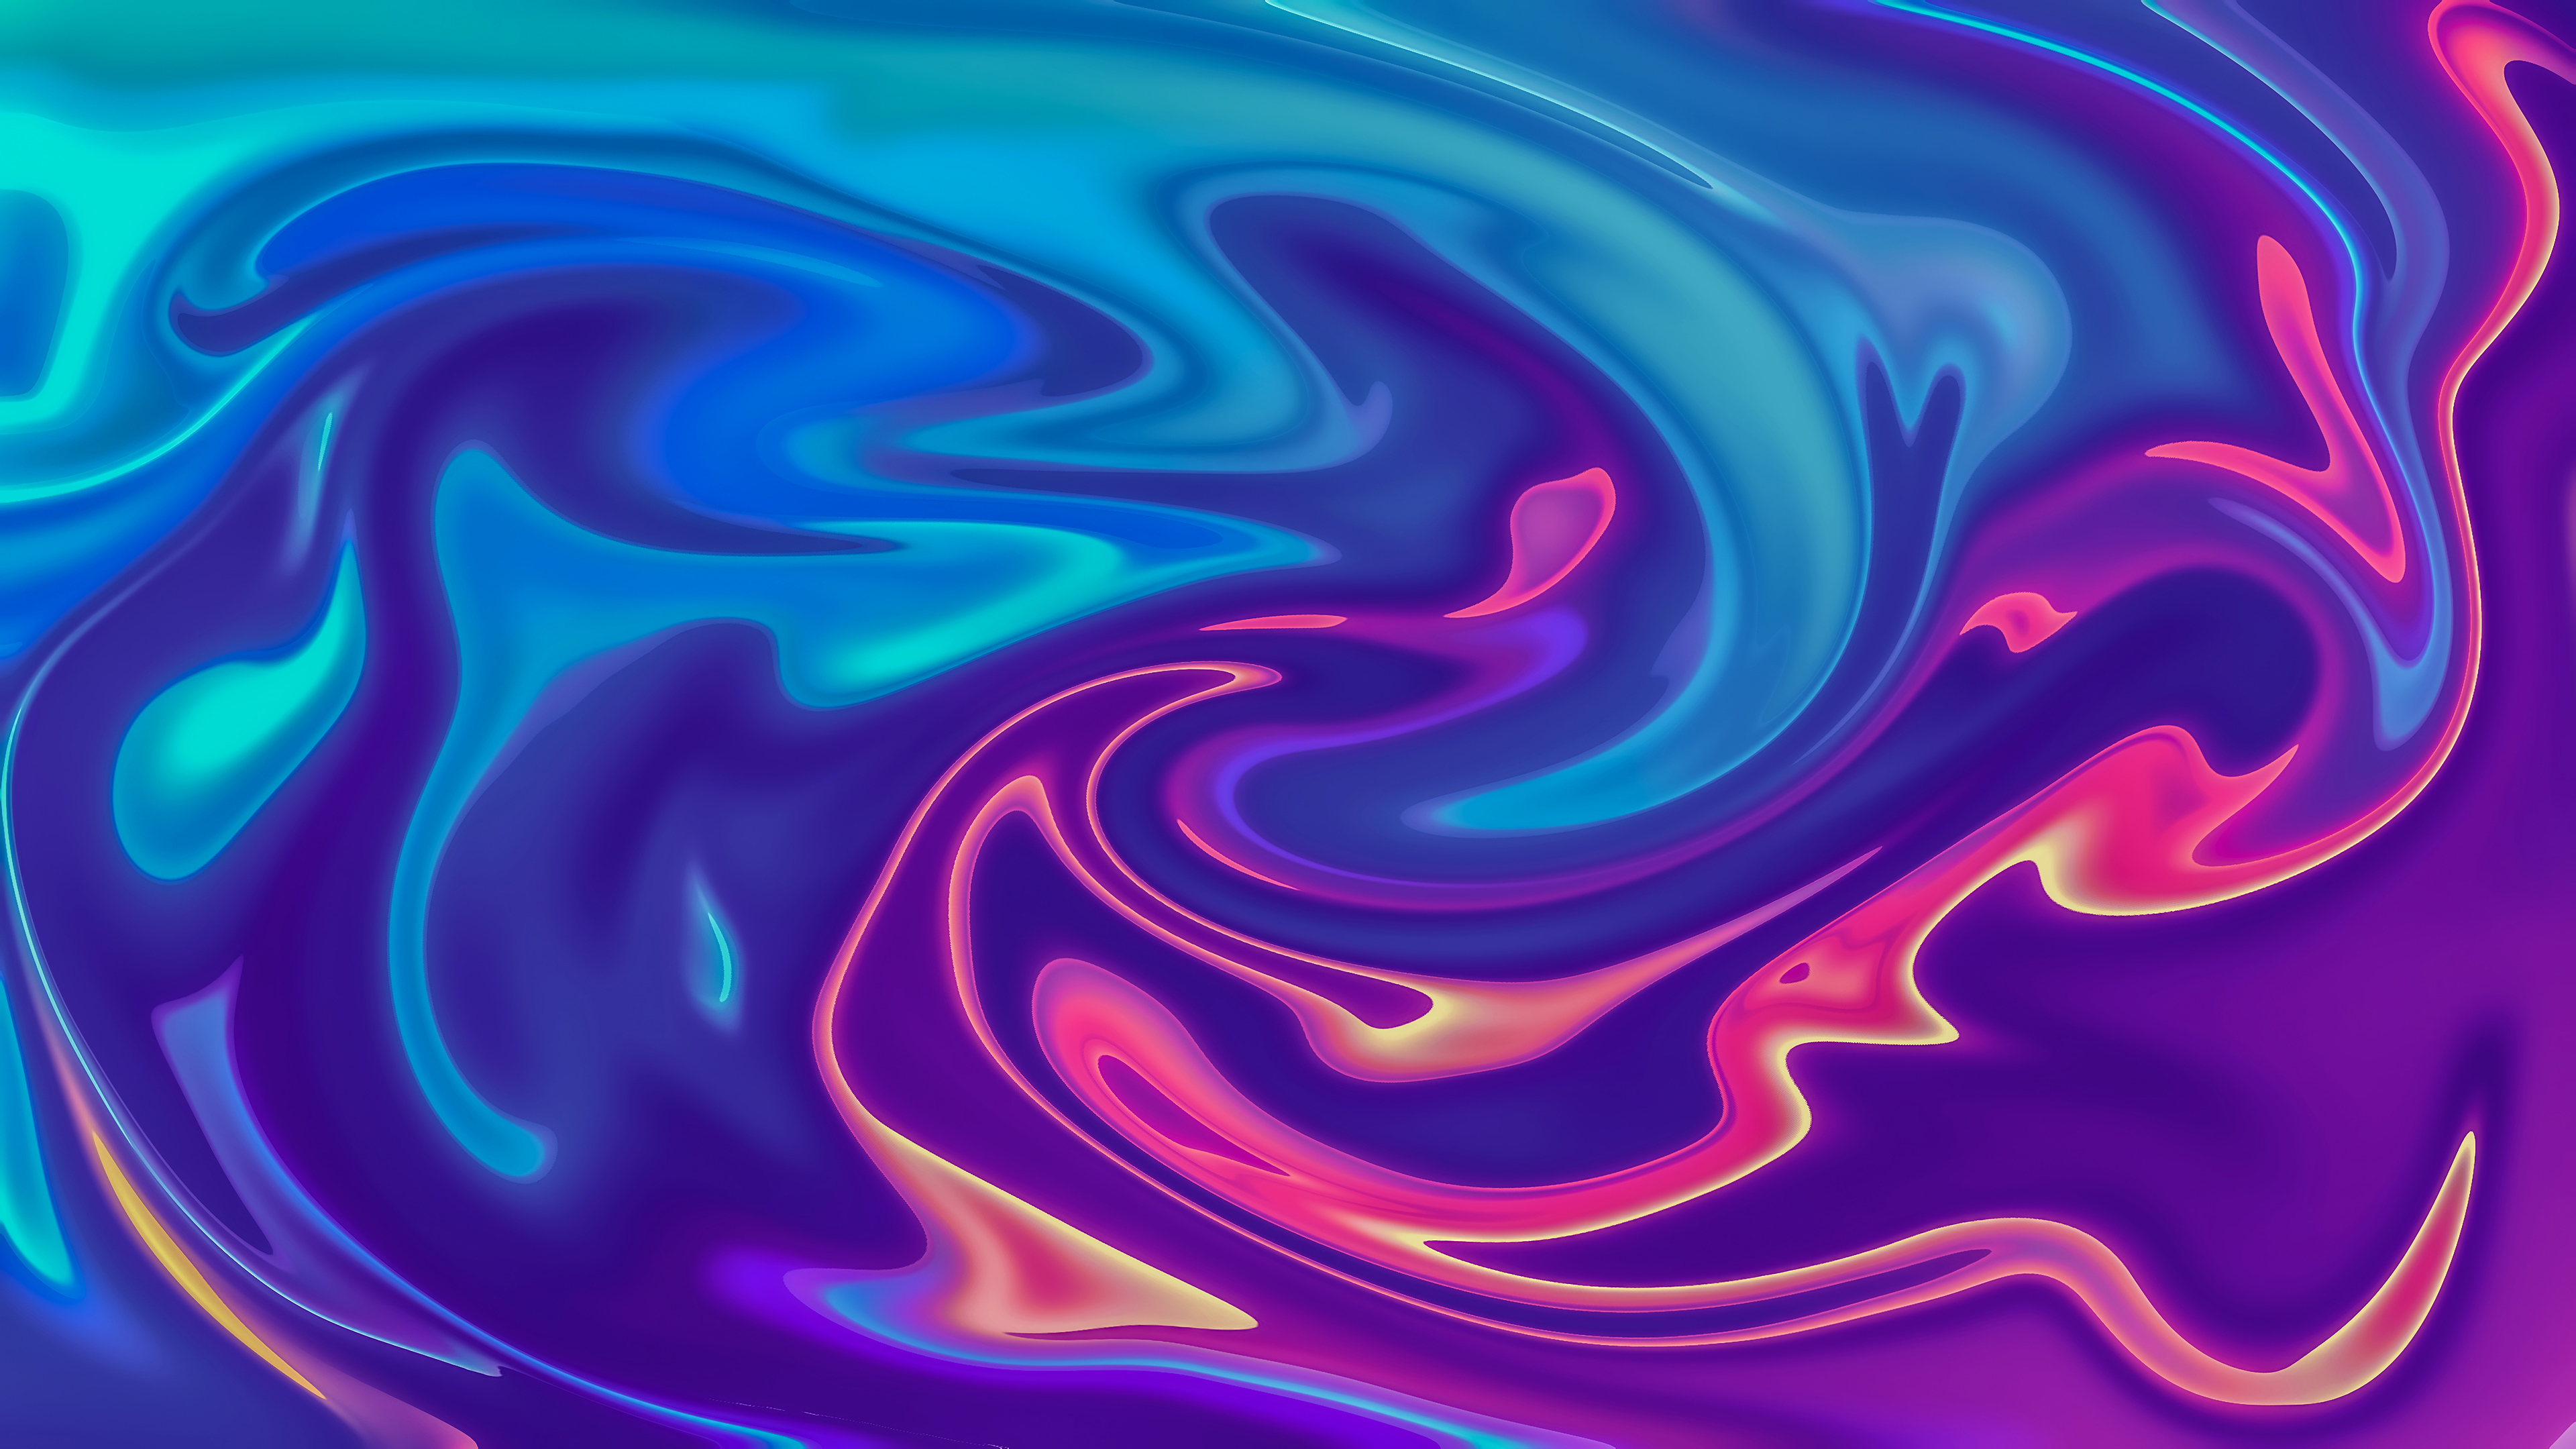 Abstract Gradient Swirl 4k Wallpaper,HD Abstract Wallpapers,4k